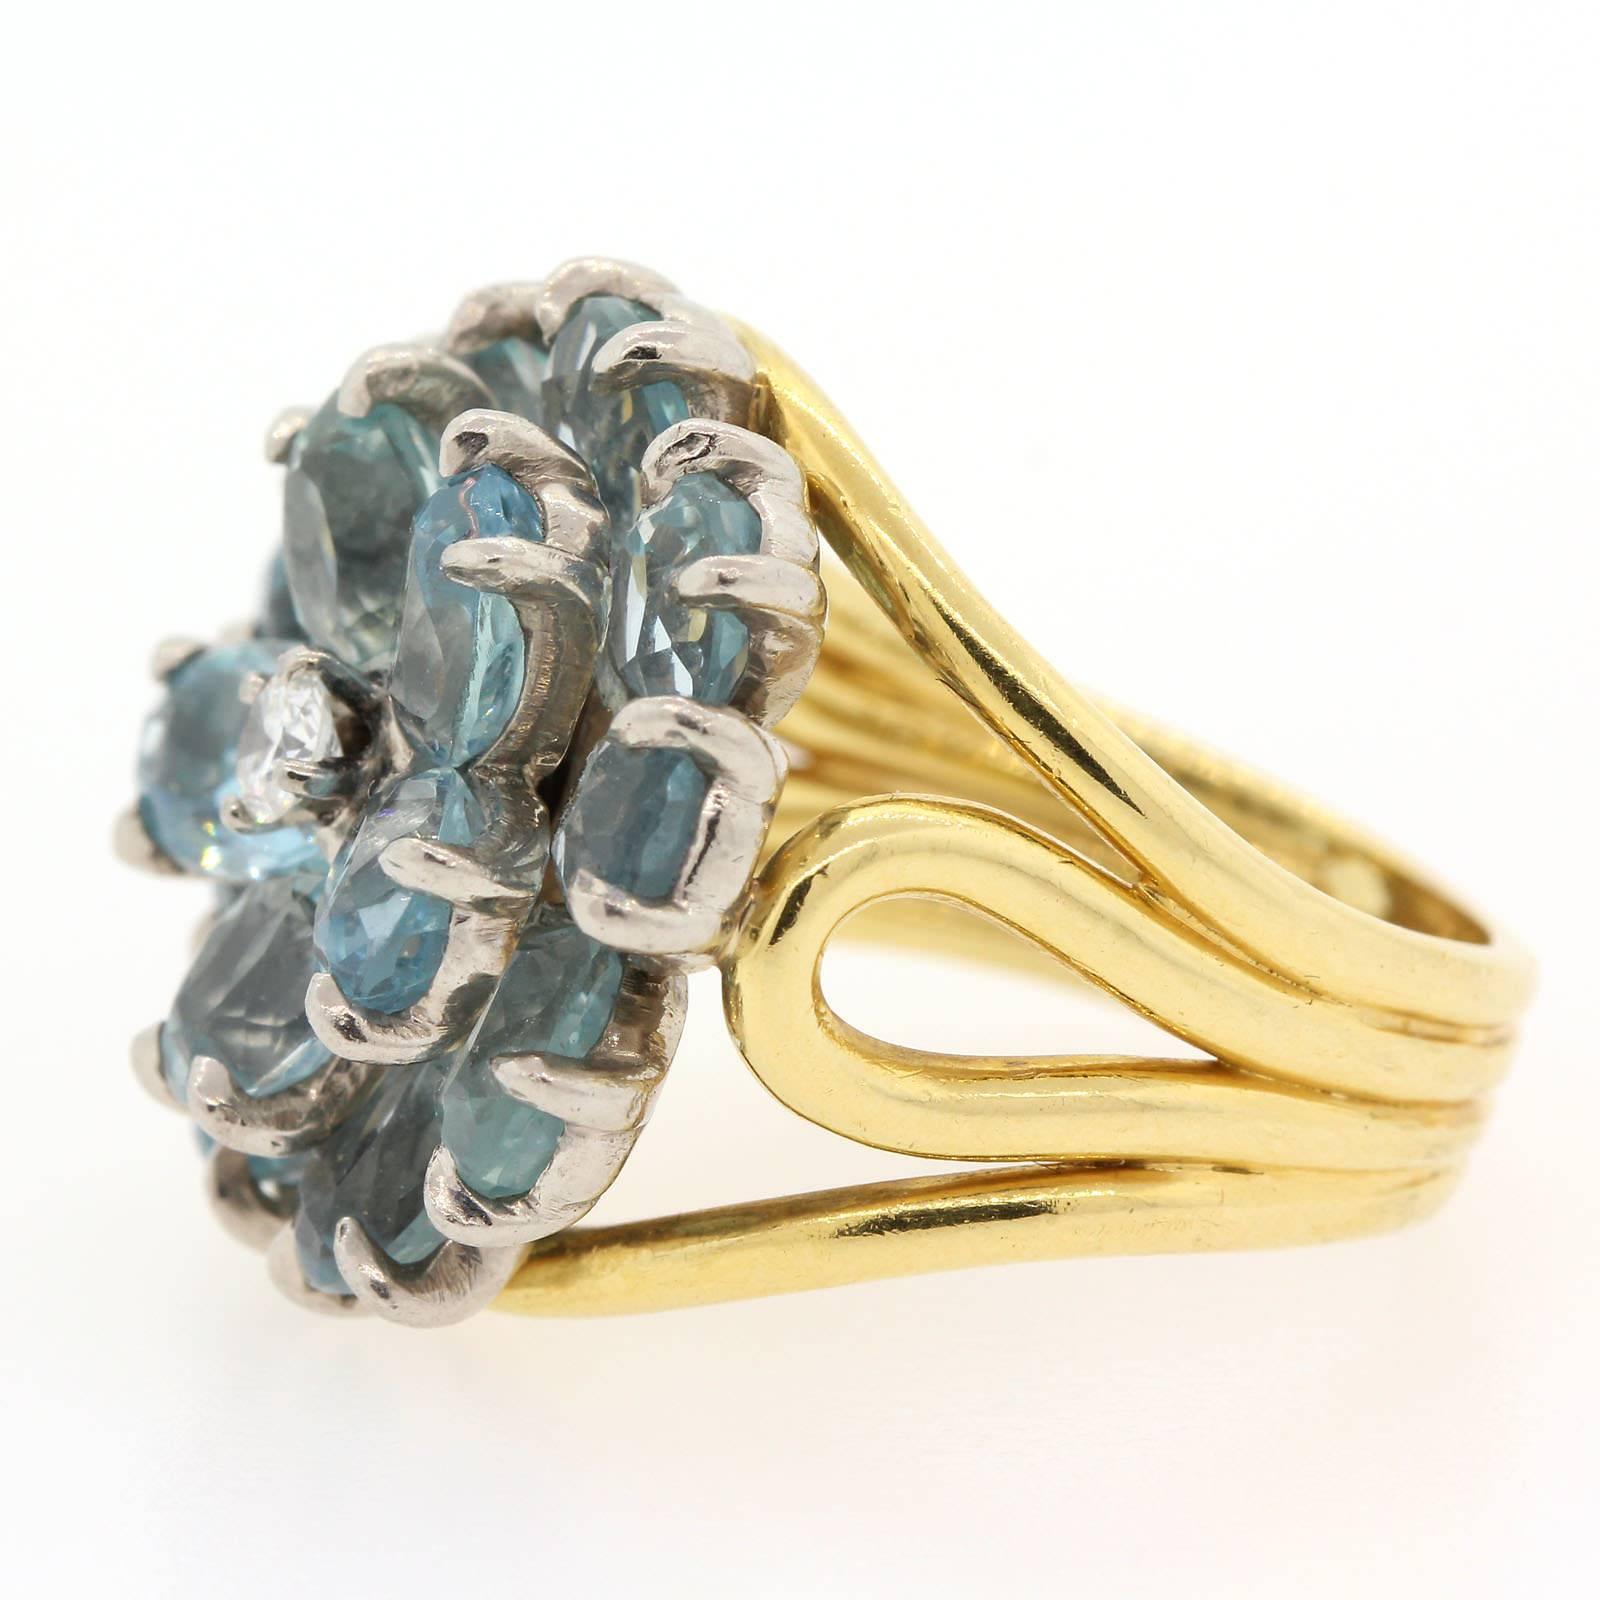 A vintage Tiffany & Co. oval cut Aquamarine flower ring.  A Round Brilliant cut diamond adds a special touch to this high design 18KT yellow gold ring.   Circa 1960s.